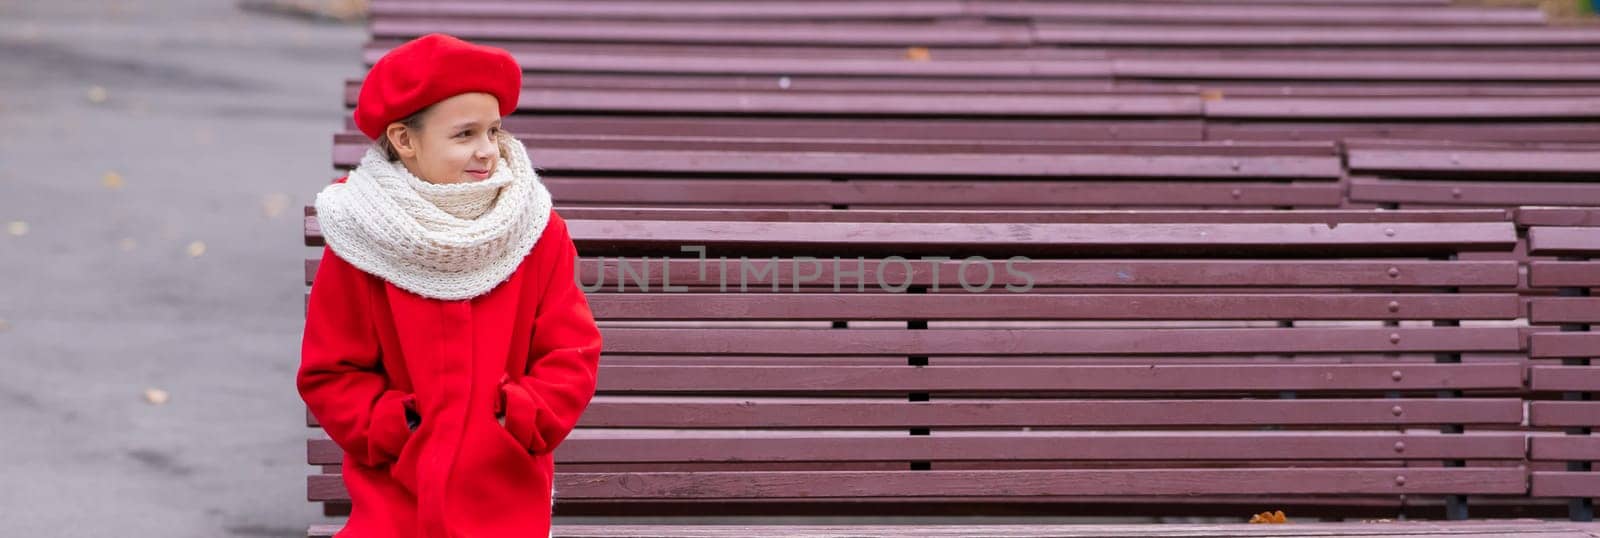 Smiling caucasian girl in a red coat and beret sits alone on a bench. by mrwed54